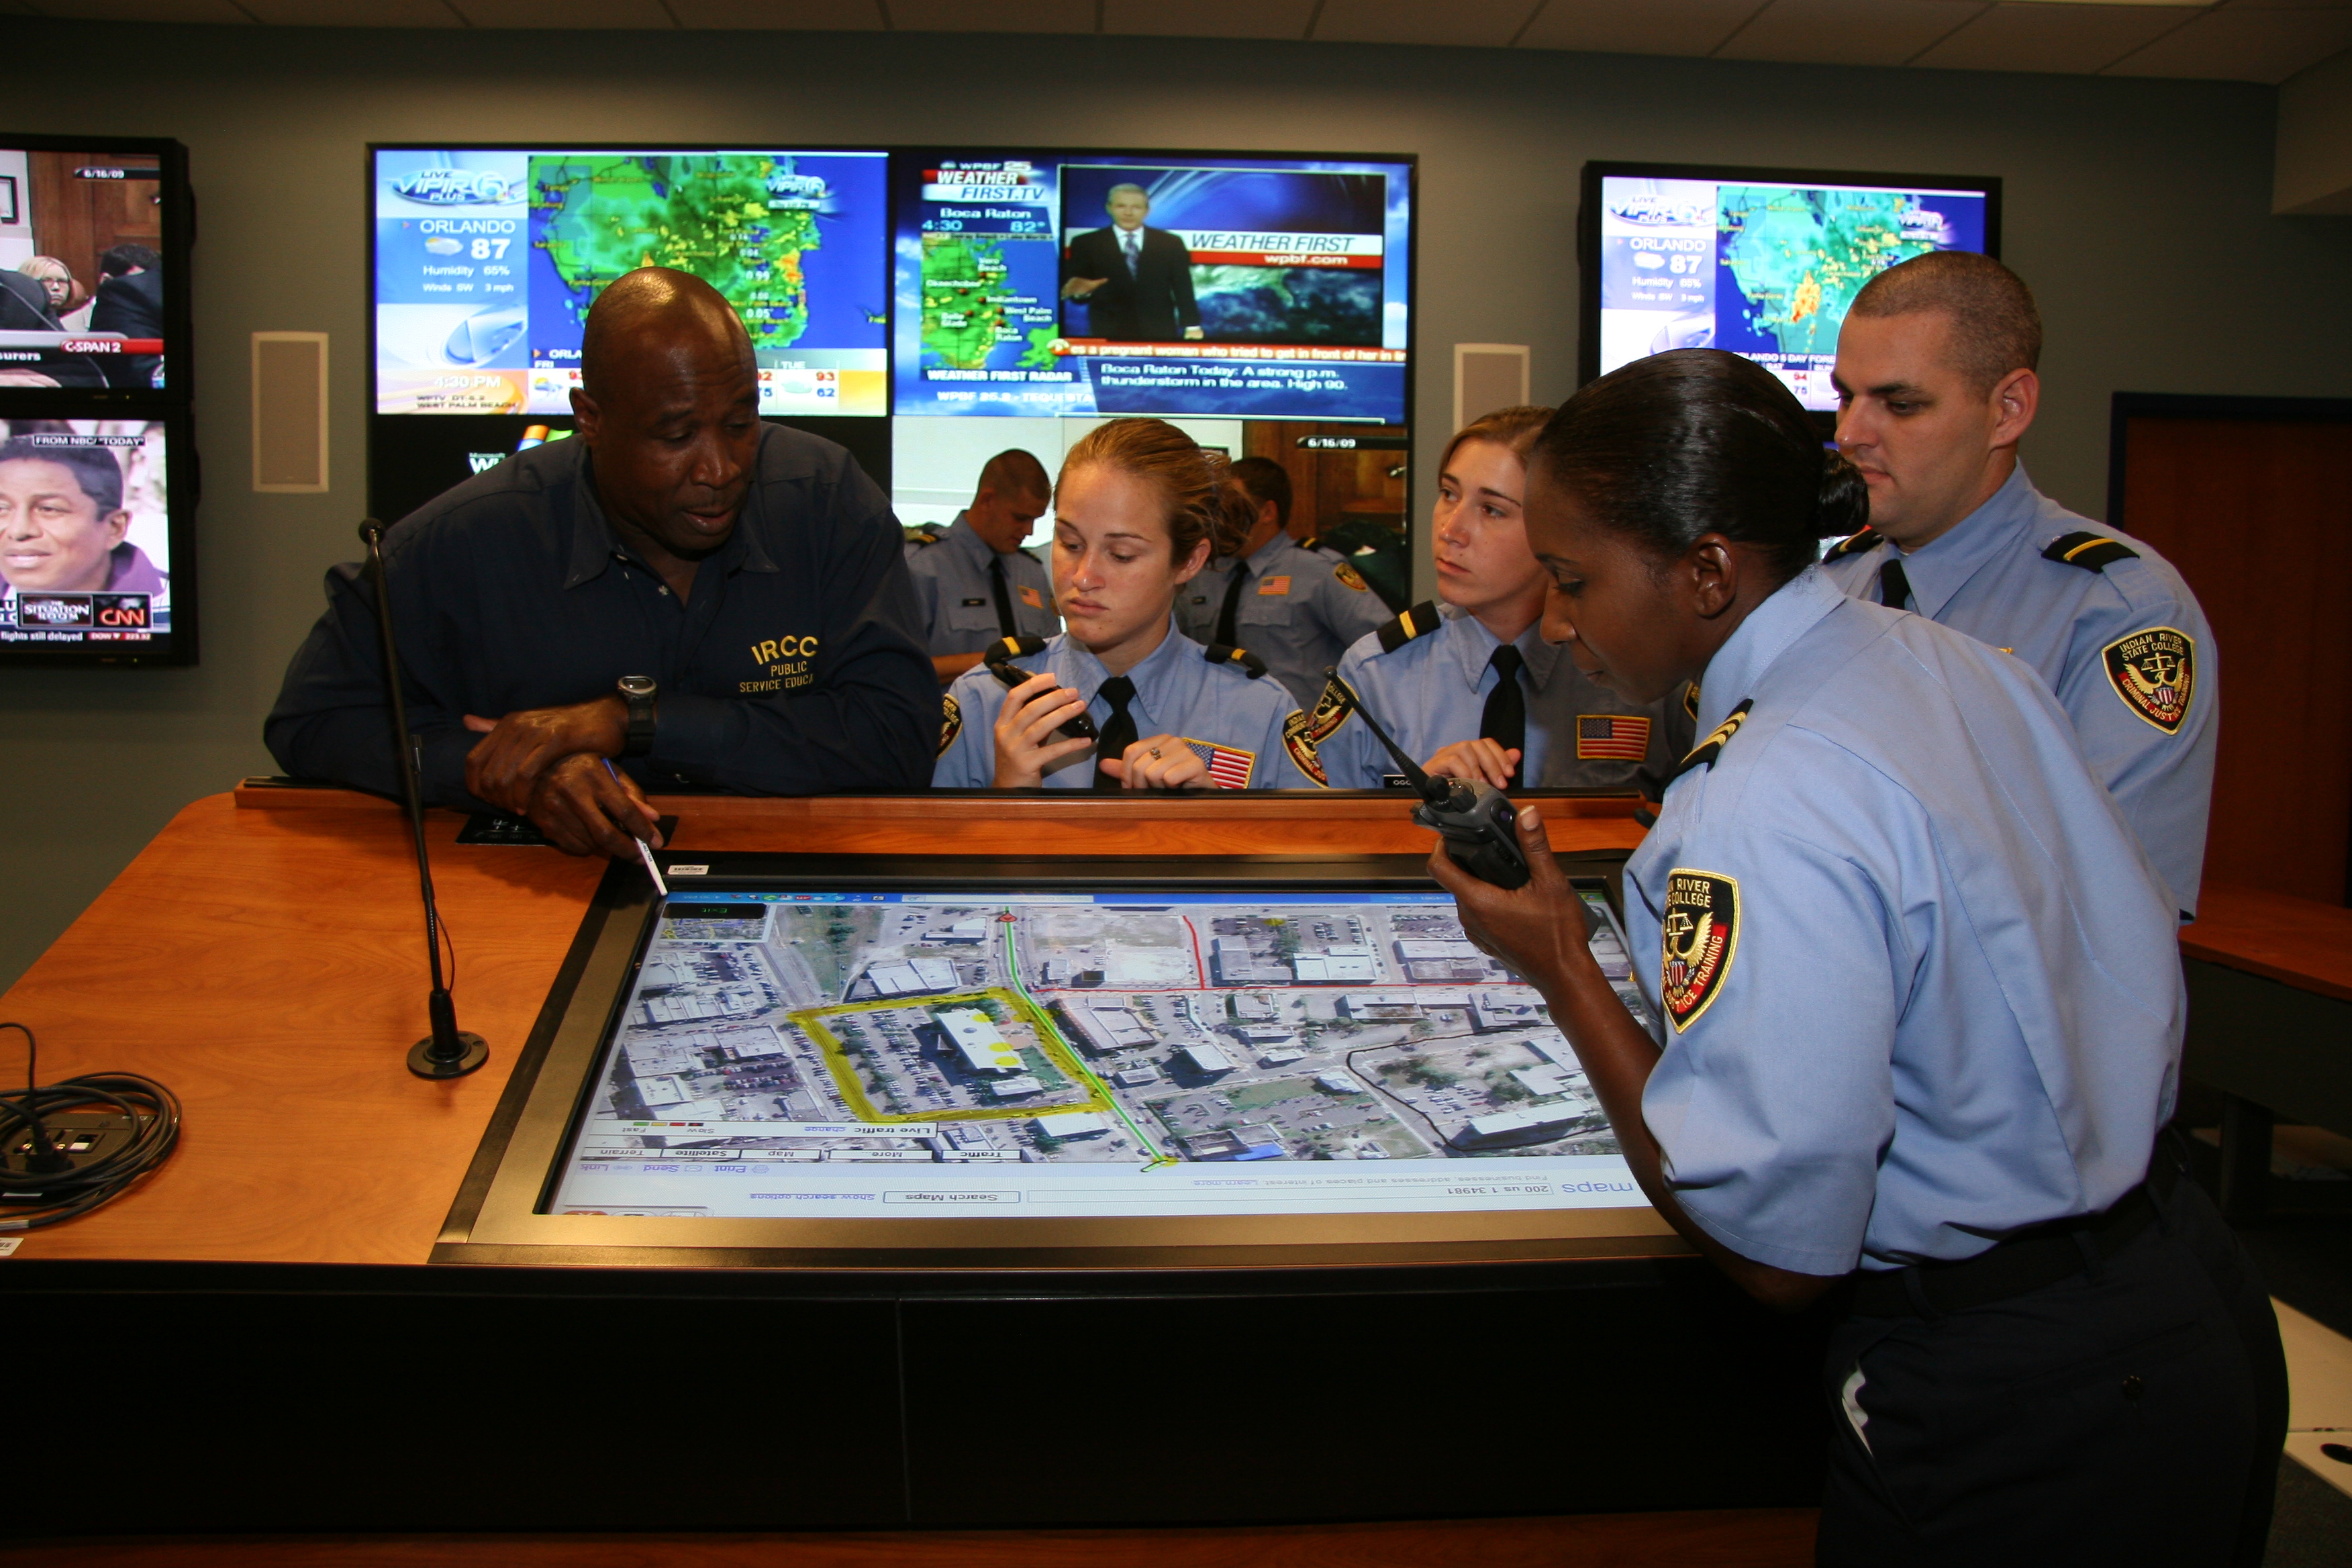 Students looking over screen in Emergency Operations Center